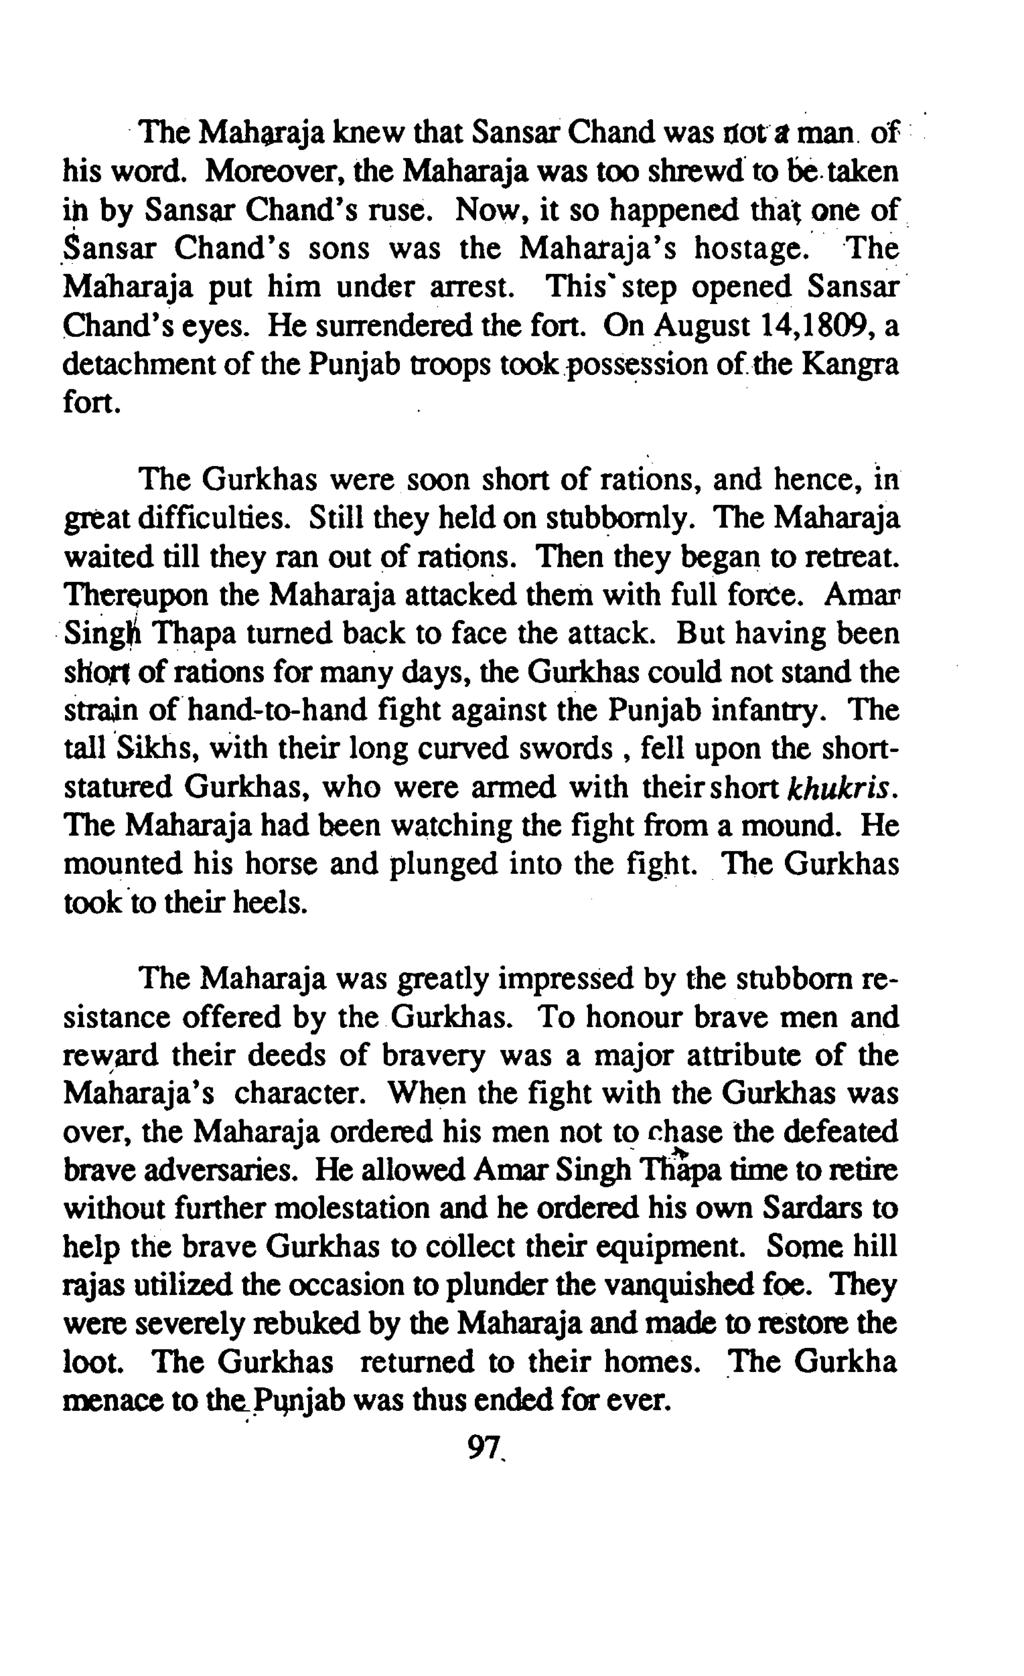 The Maharaja knew that Sansar Chand was tlota man, of his word. Moreover, the Maharaja was too shrewd'to be, taken ih by Sansar Chand's ruse.